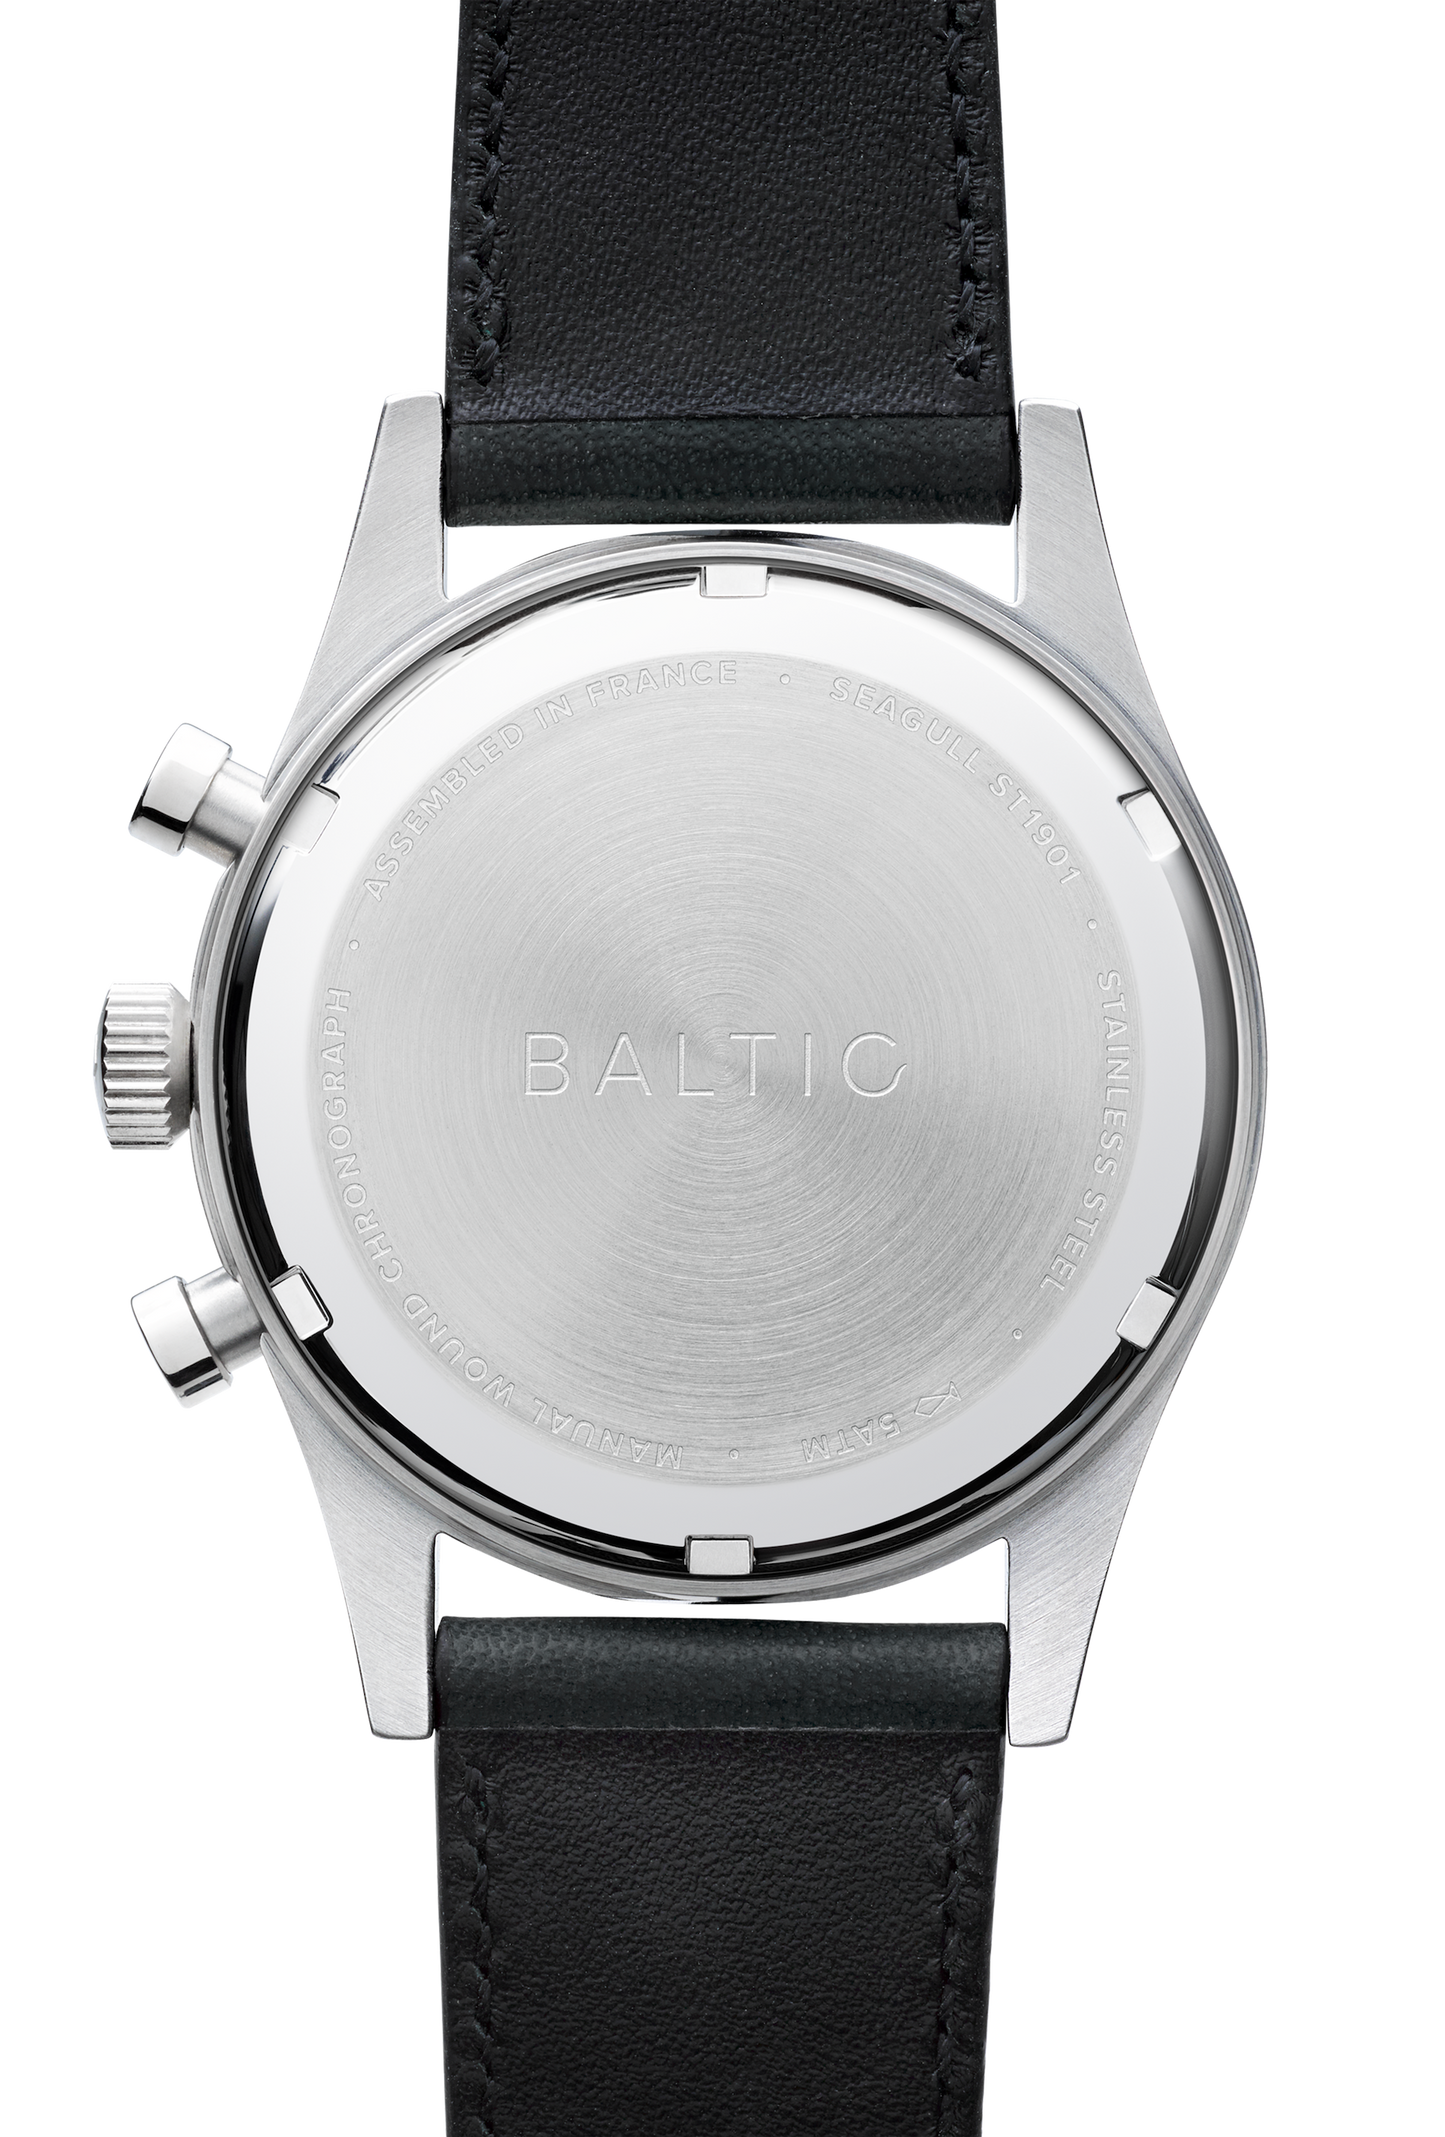 Baltic Bicompax 002 Silver - Stitched Navy Blue Strap